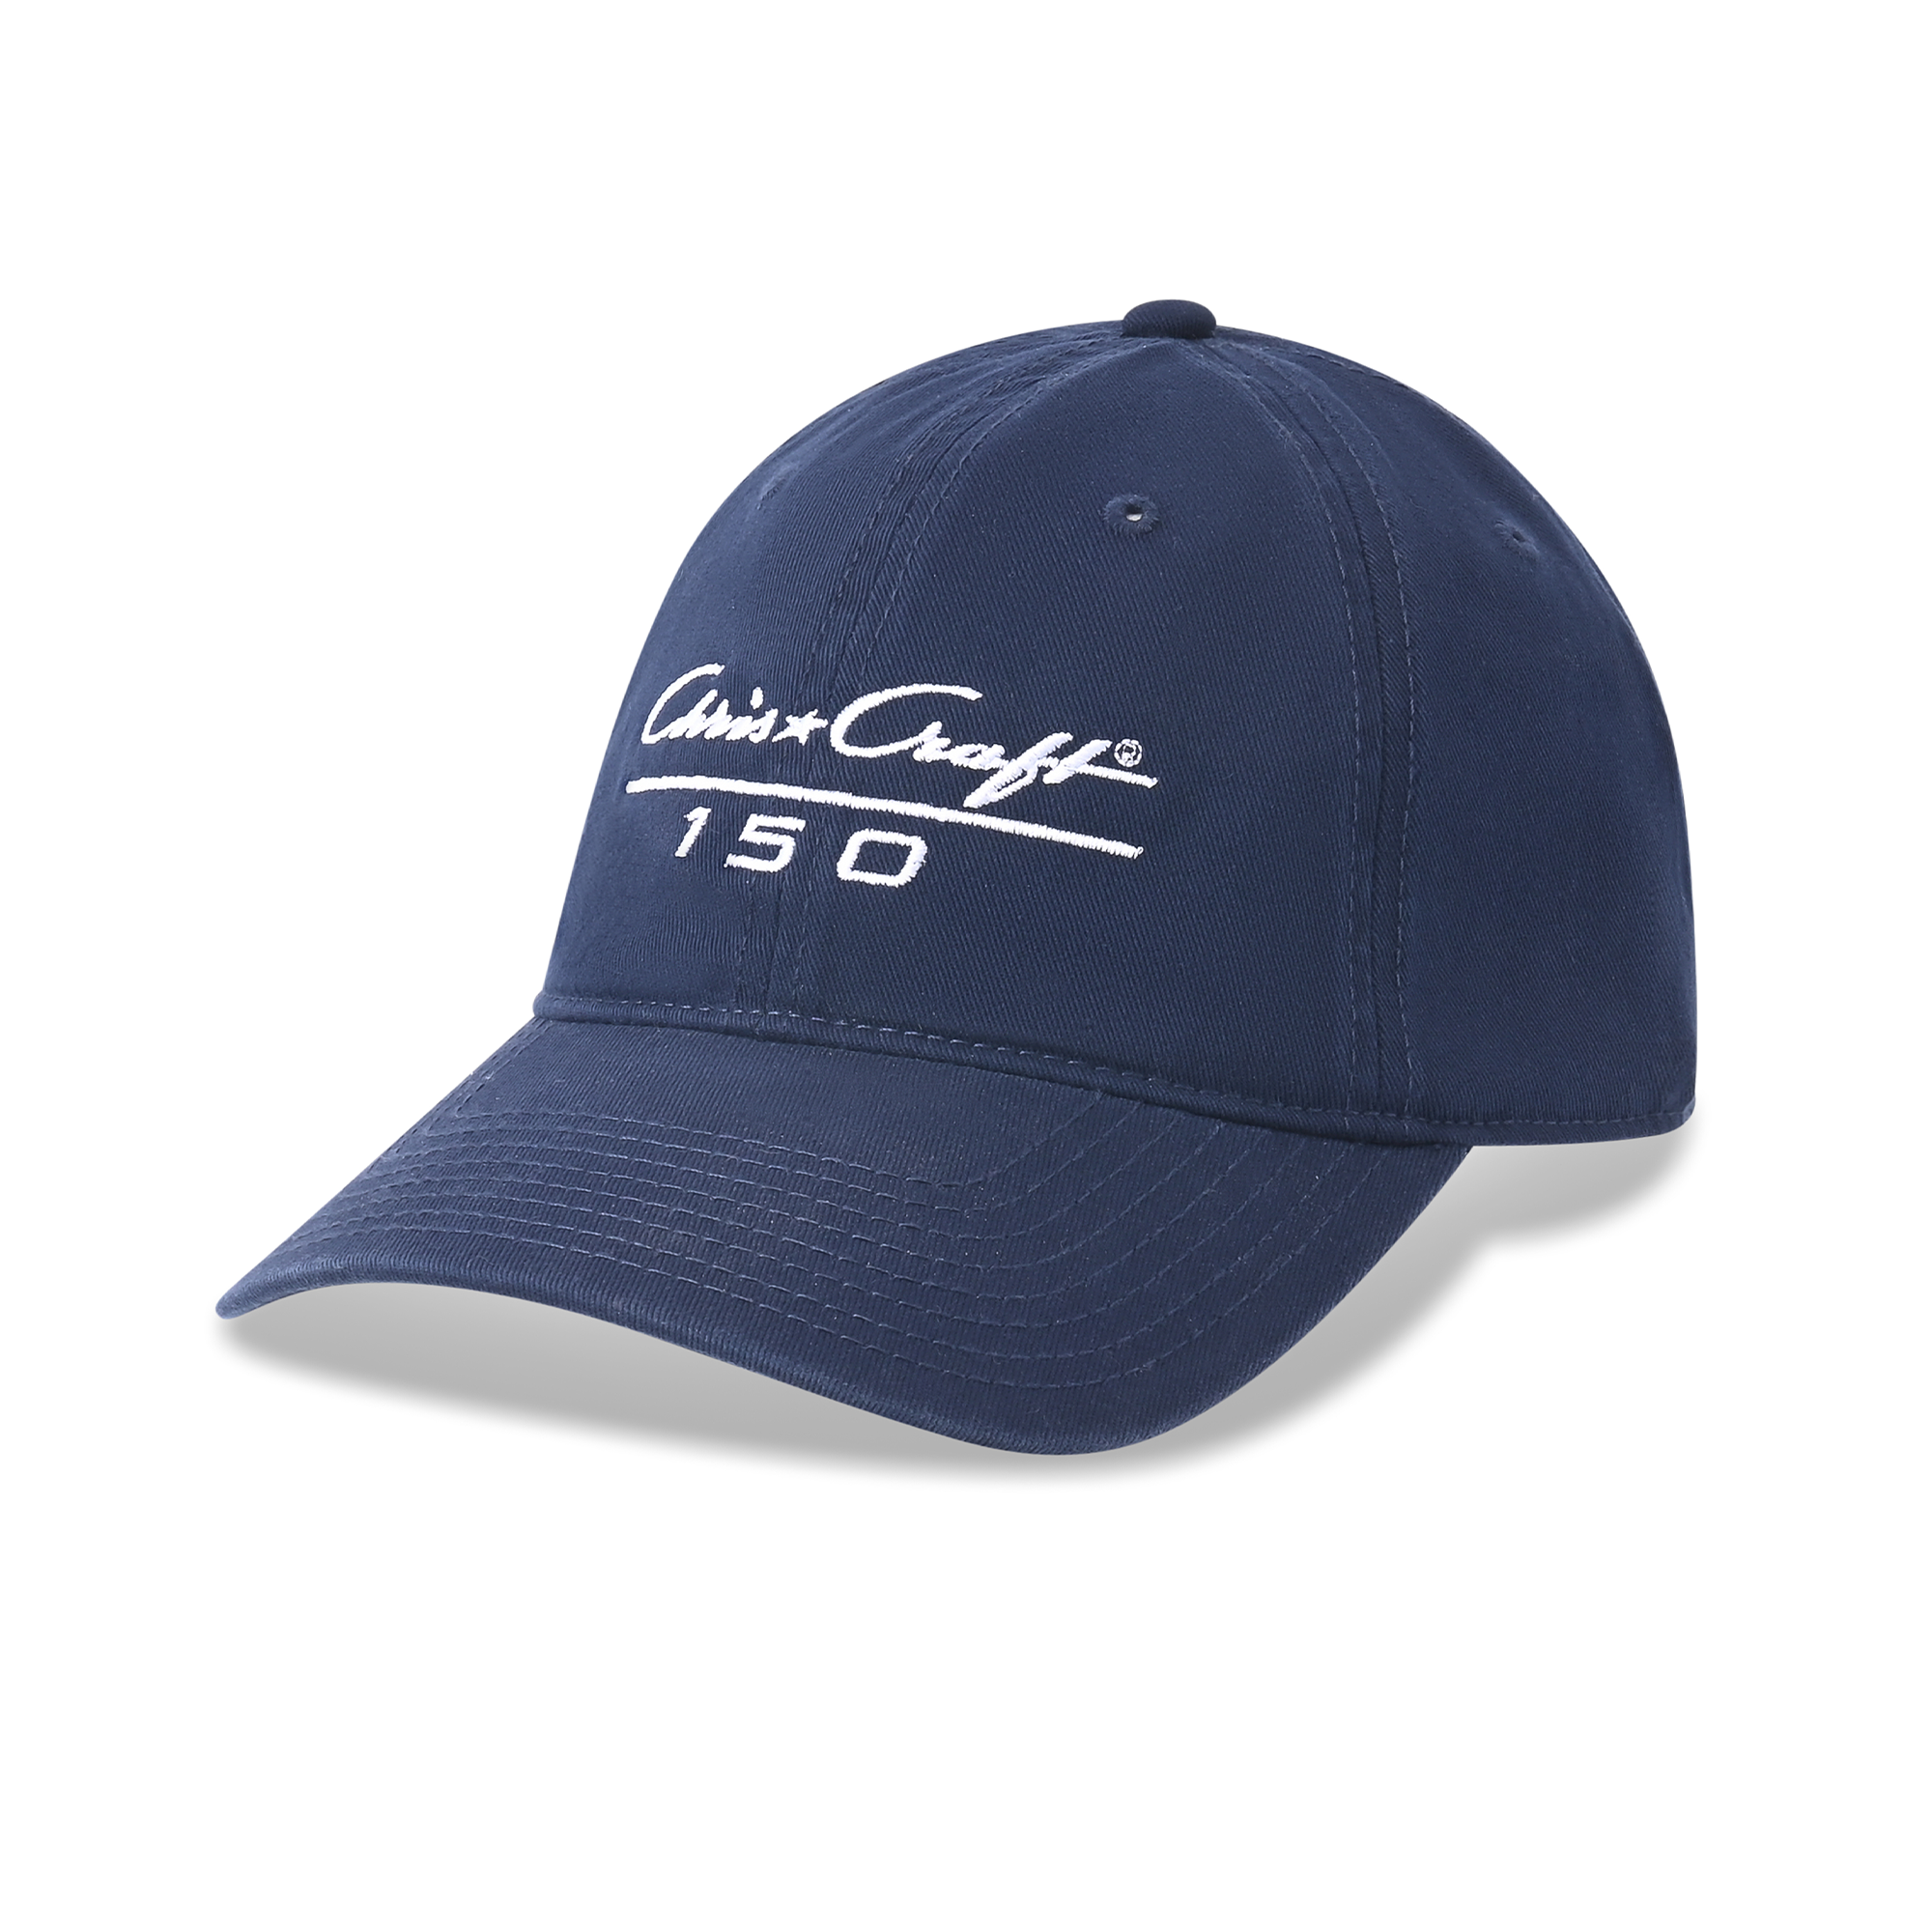 Limited Edition 150th Runabout Twill Cap